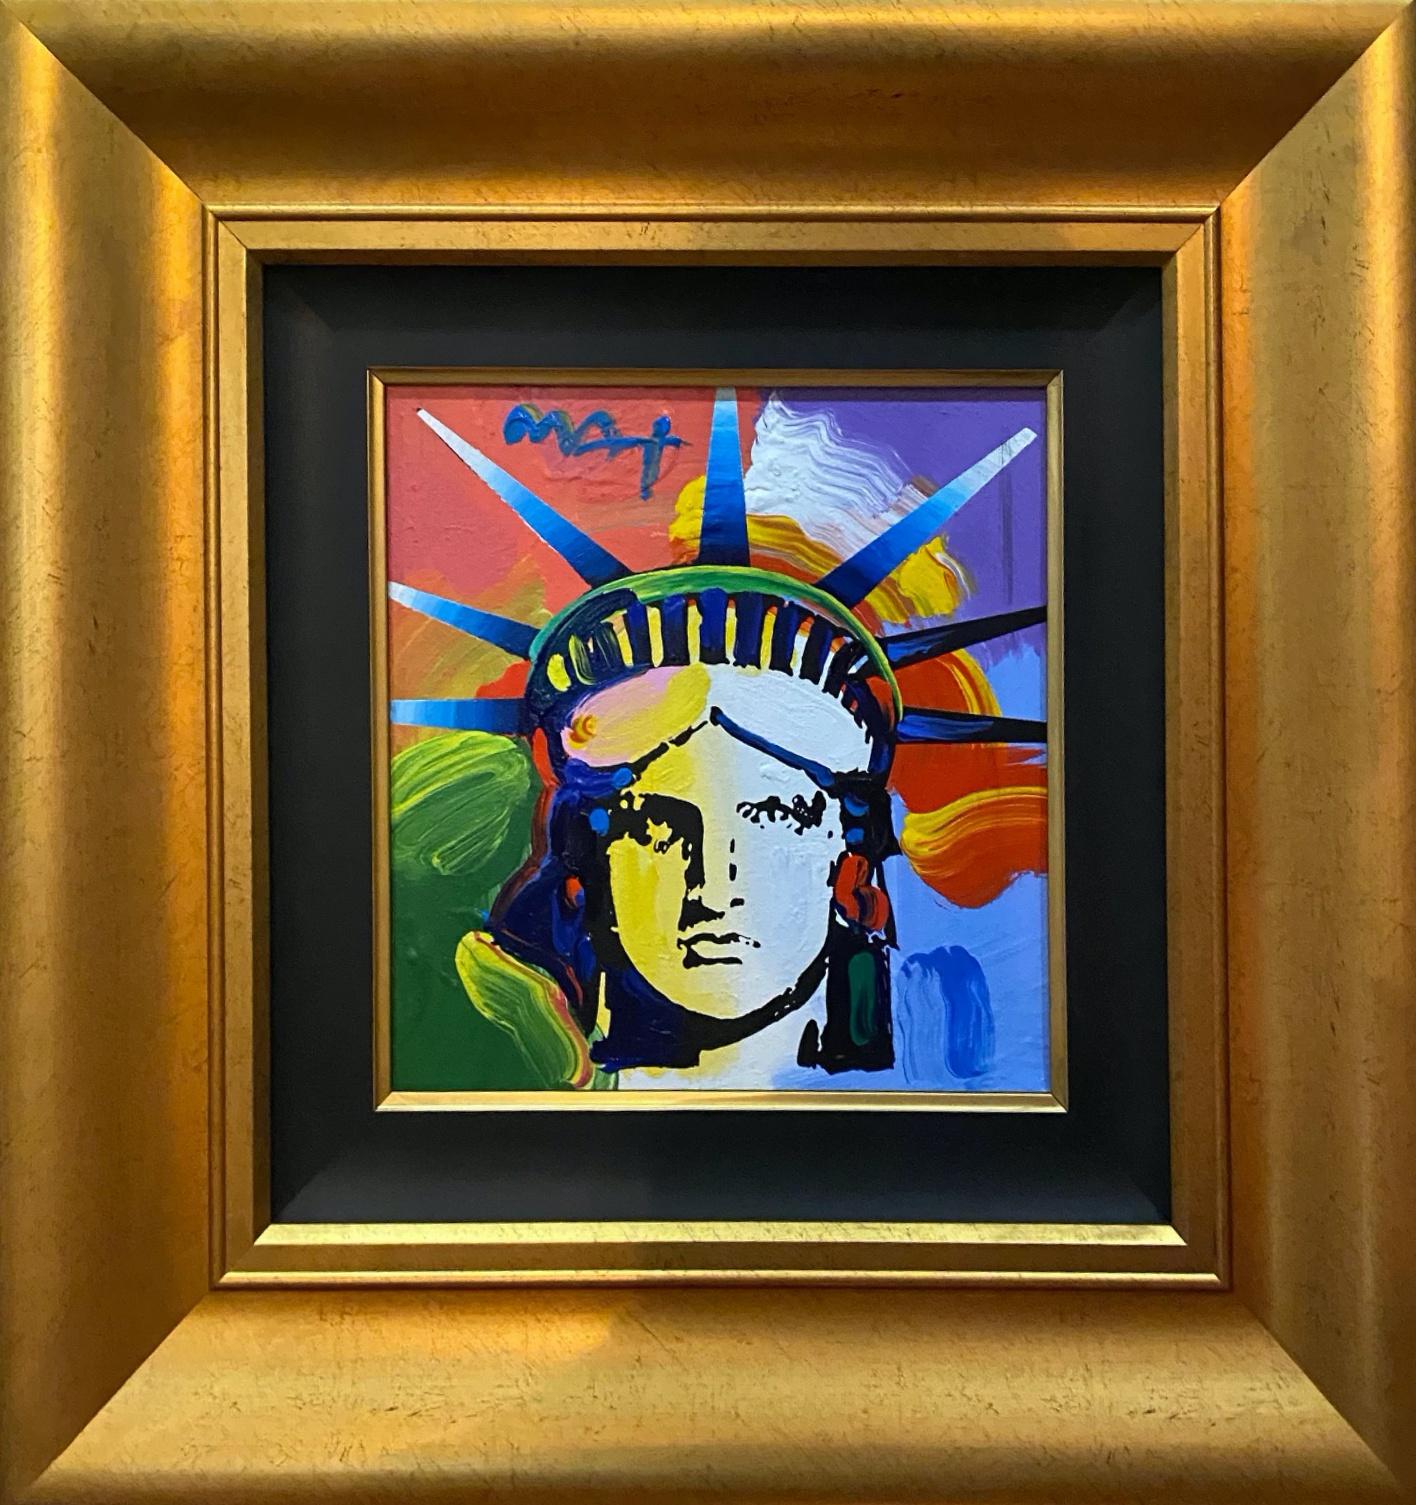 This is an original, one-of-a-kind acrylic painting on canvas by renowned contemporary pop artist Peter Max - not a serigraph or "hand-embellished" serigraph or other incarnation of his work you often see. The Park West certificate comes with it. I